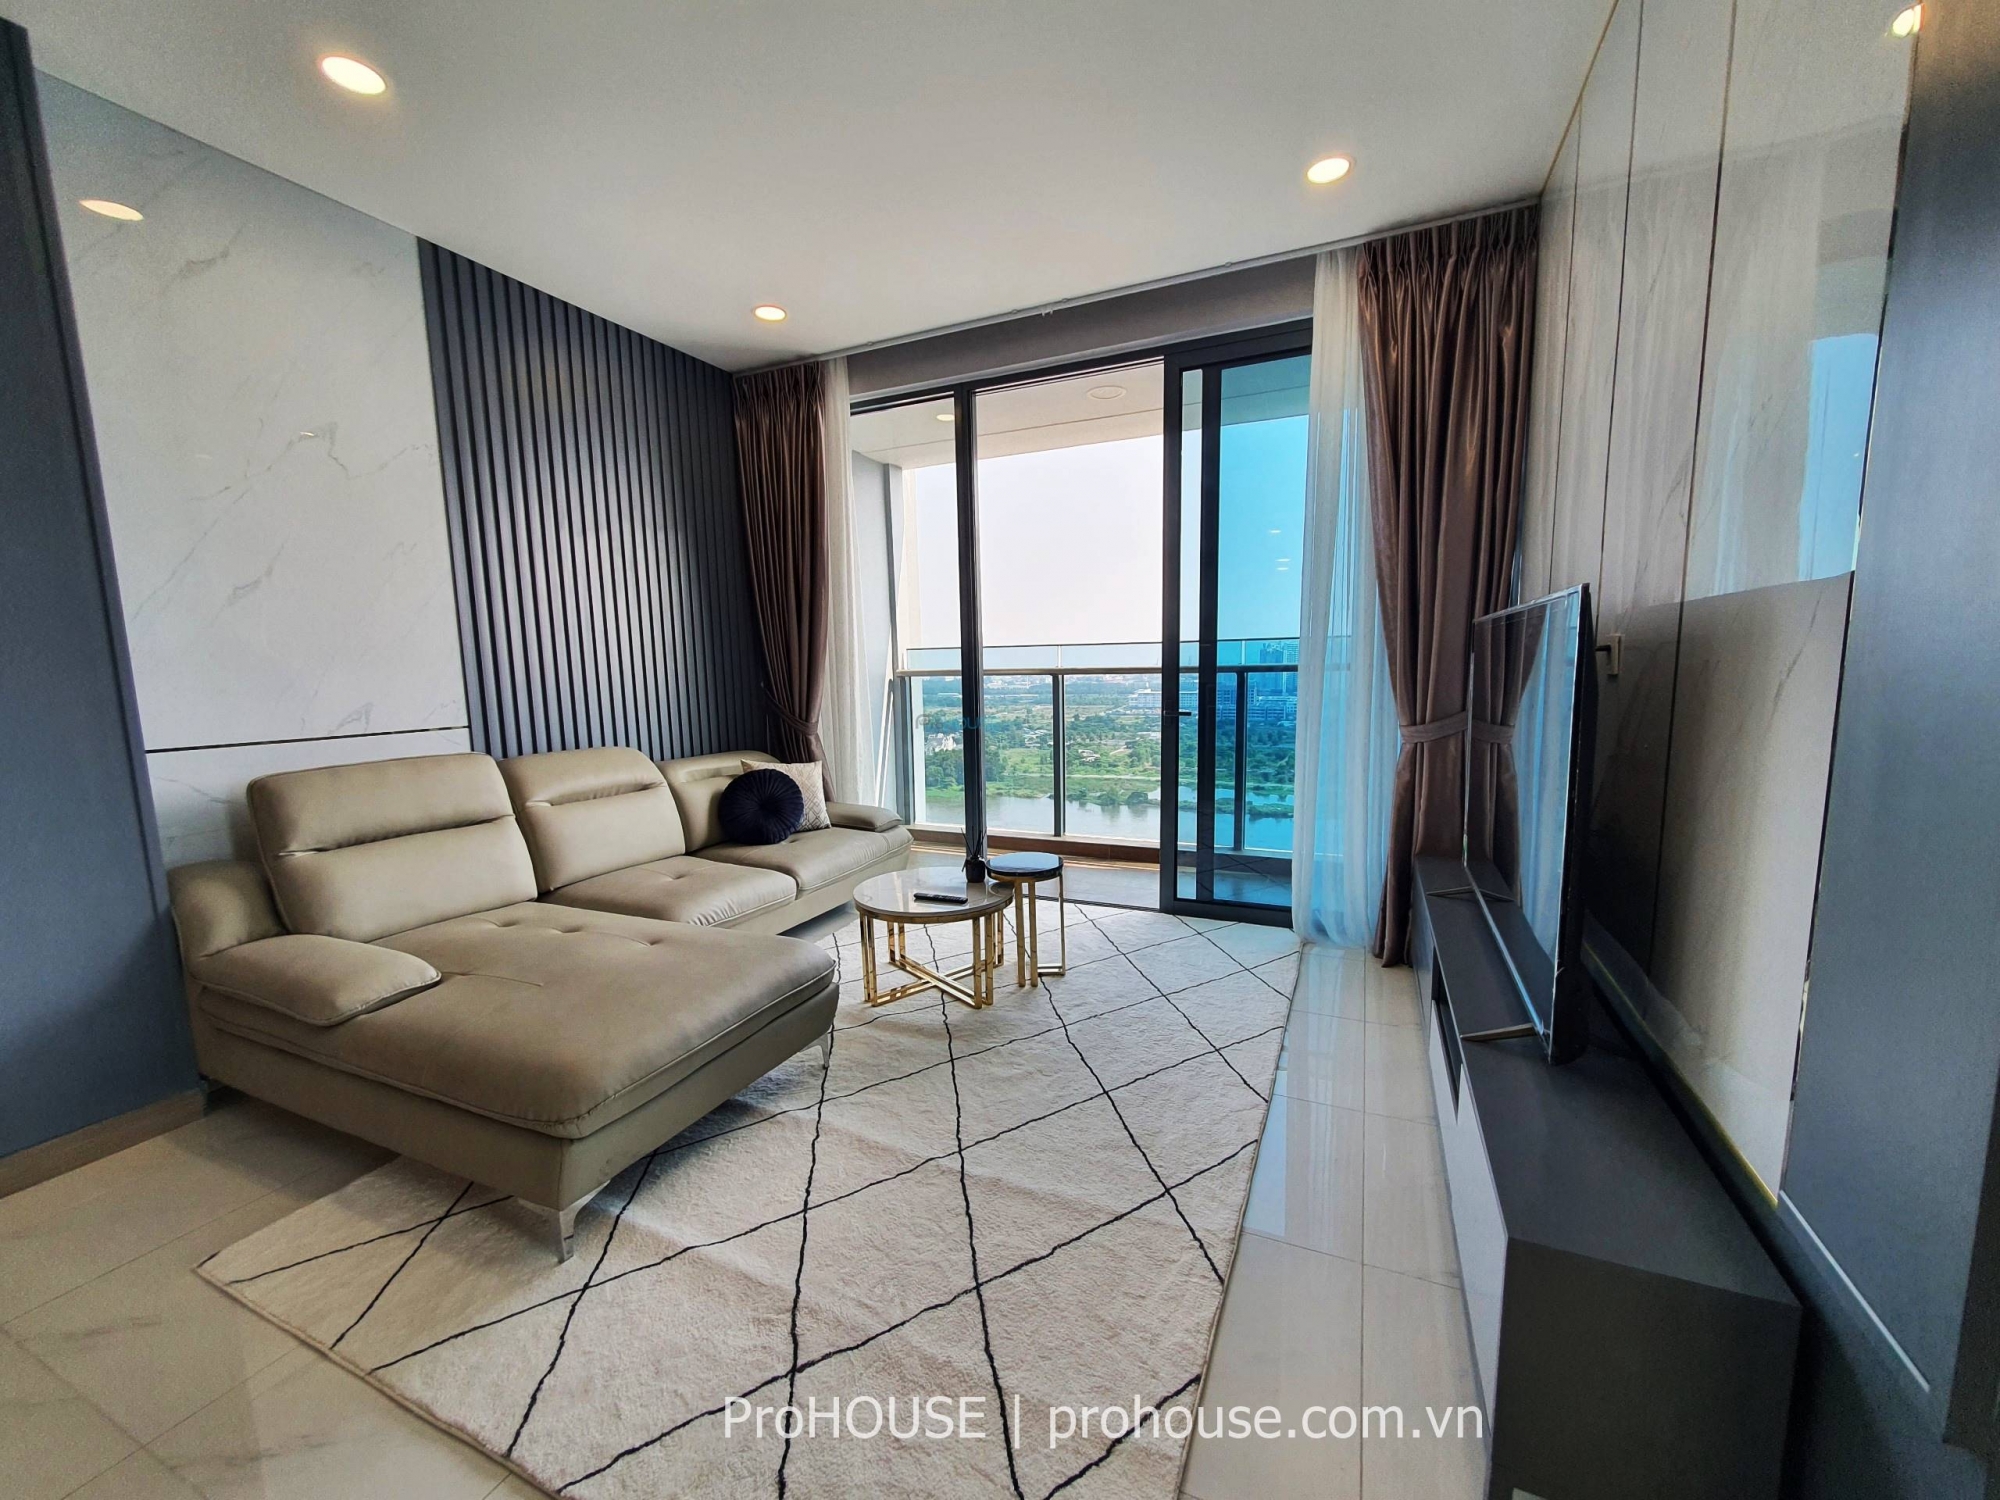 Sunwah Pearl 3br apartment with river view extremely nice interior design for rent